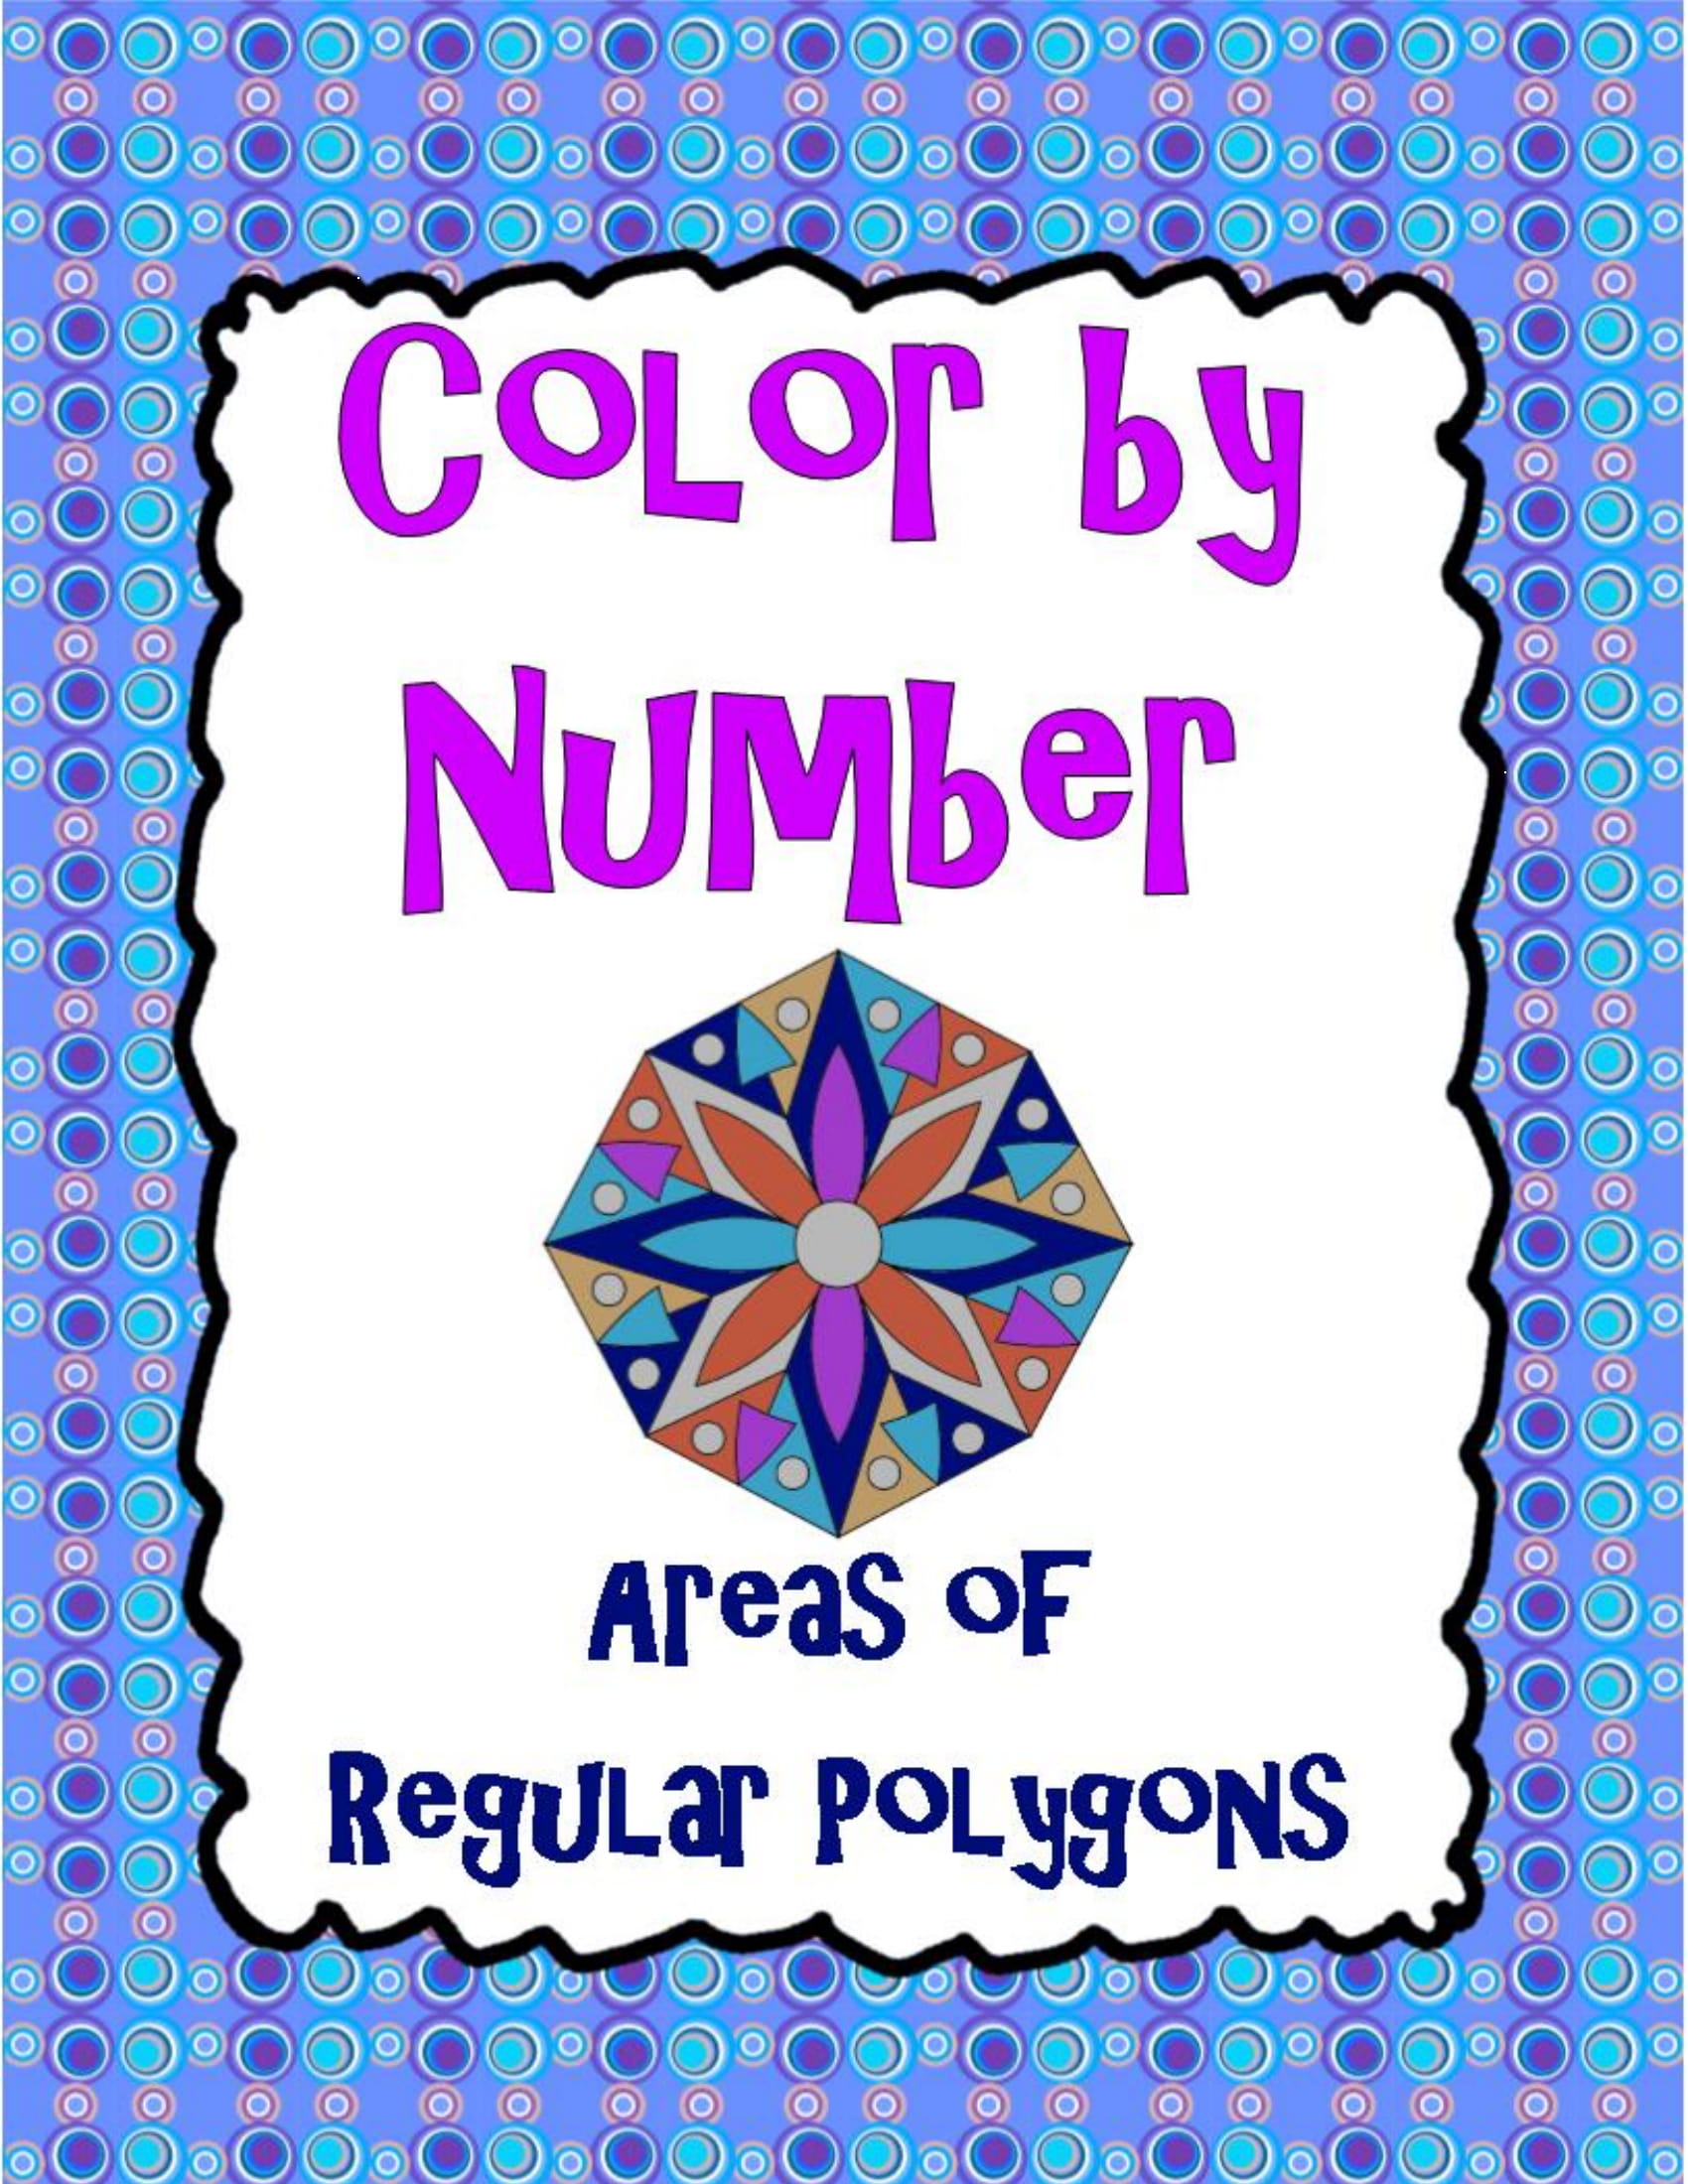 areas-of-regular-polygons-color-by-number-1-funrithmetic